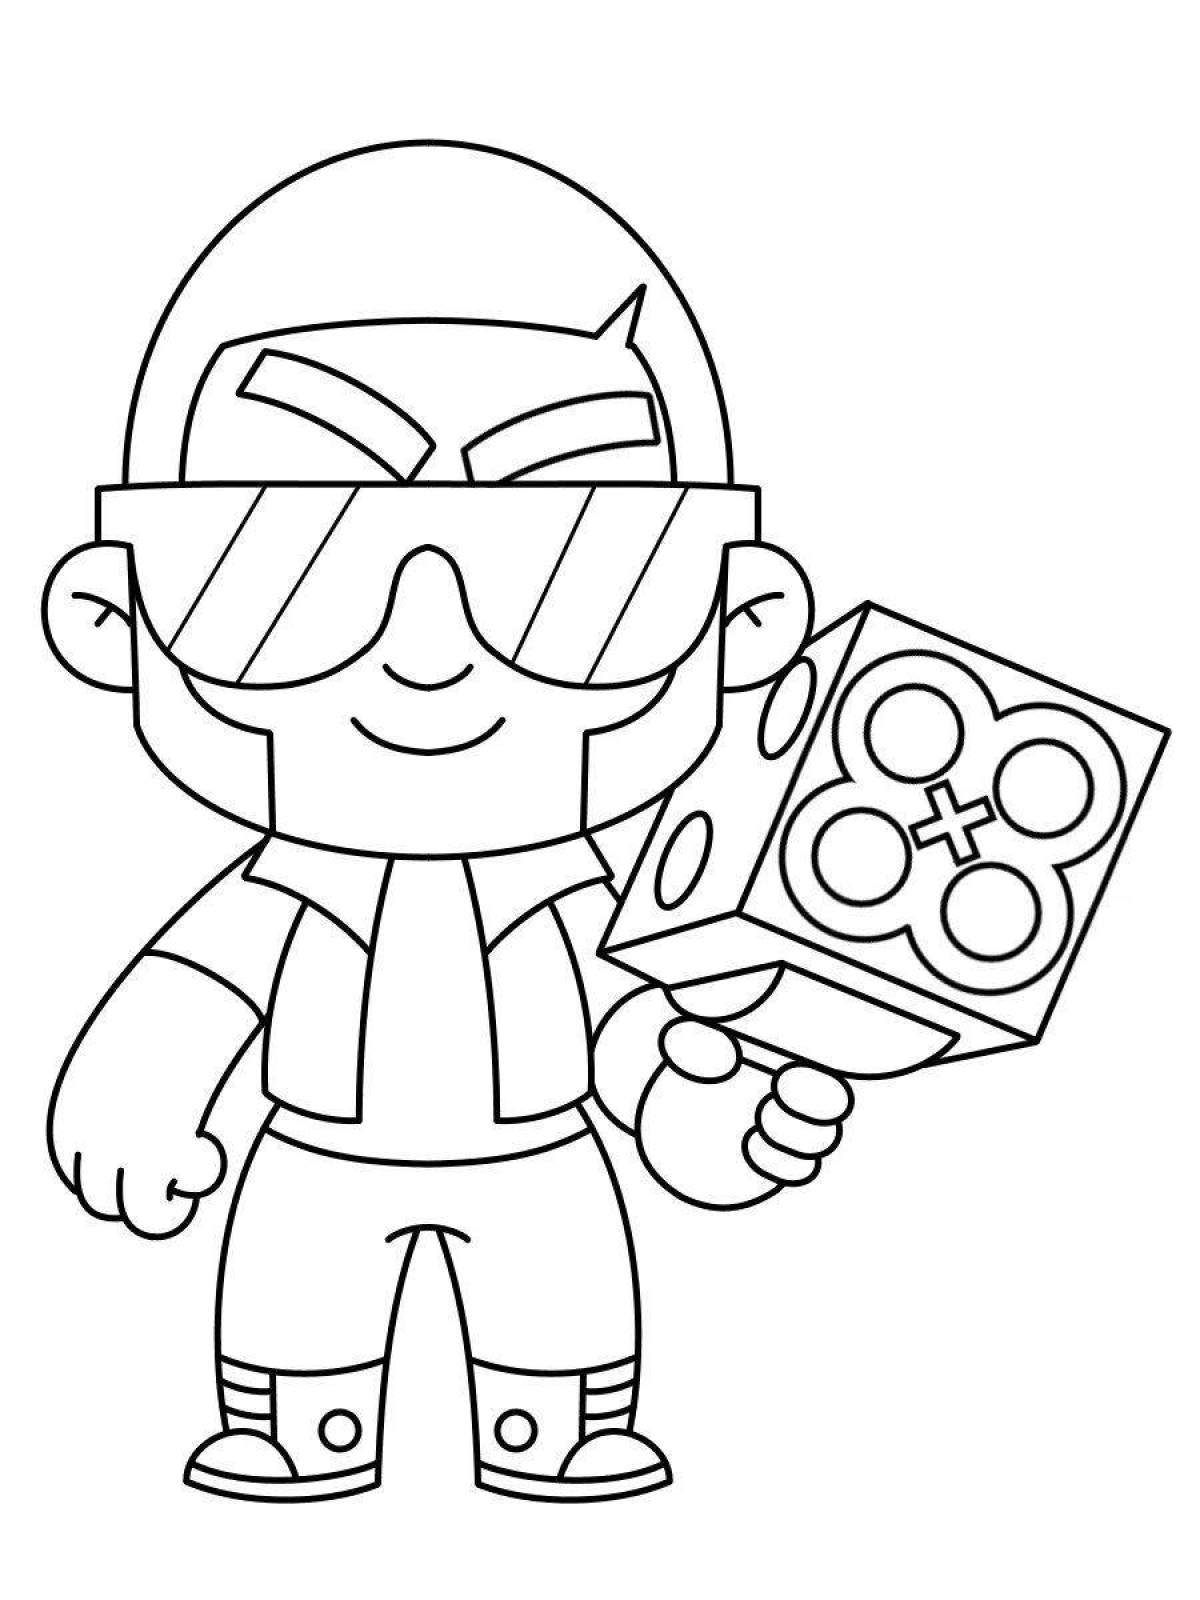 Animated fighting pins coloring page